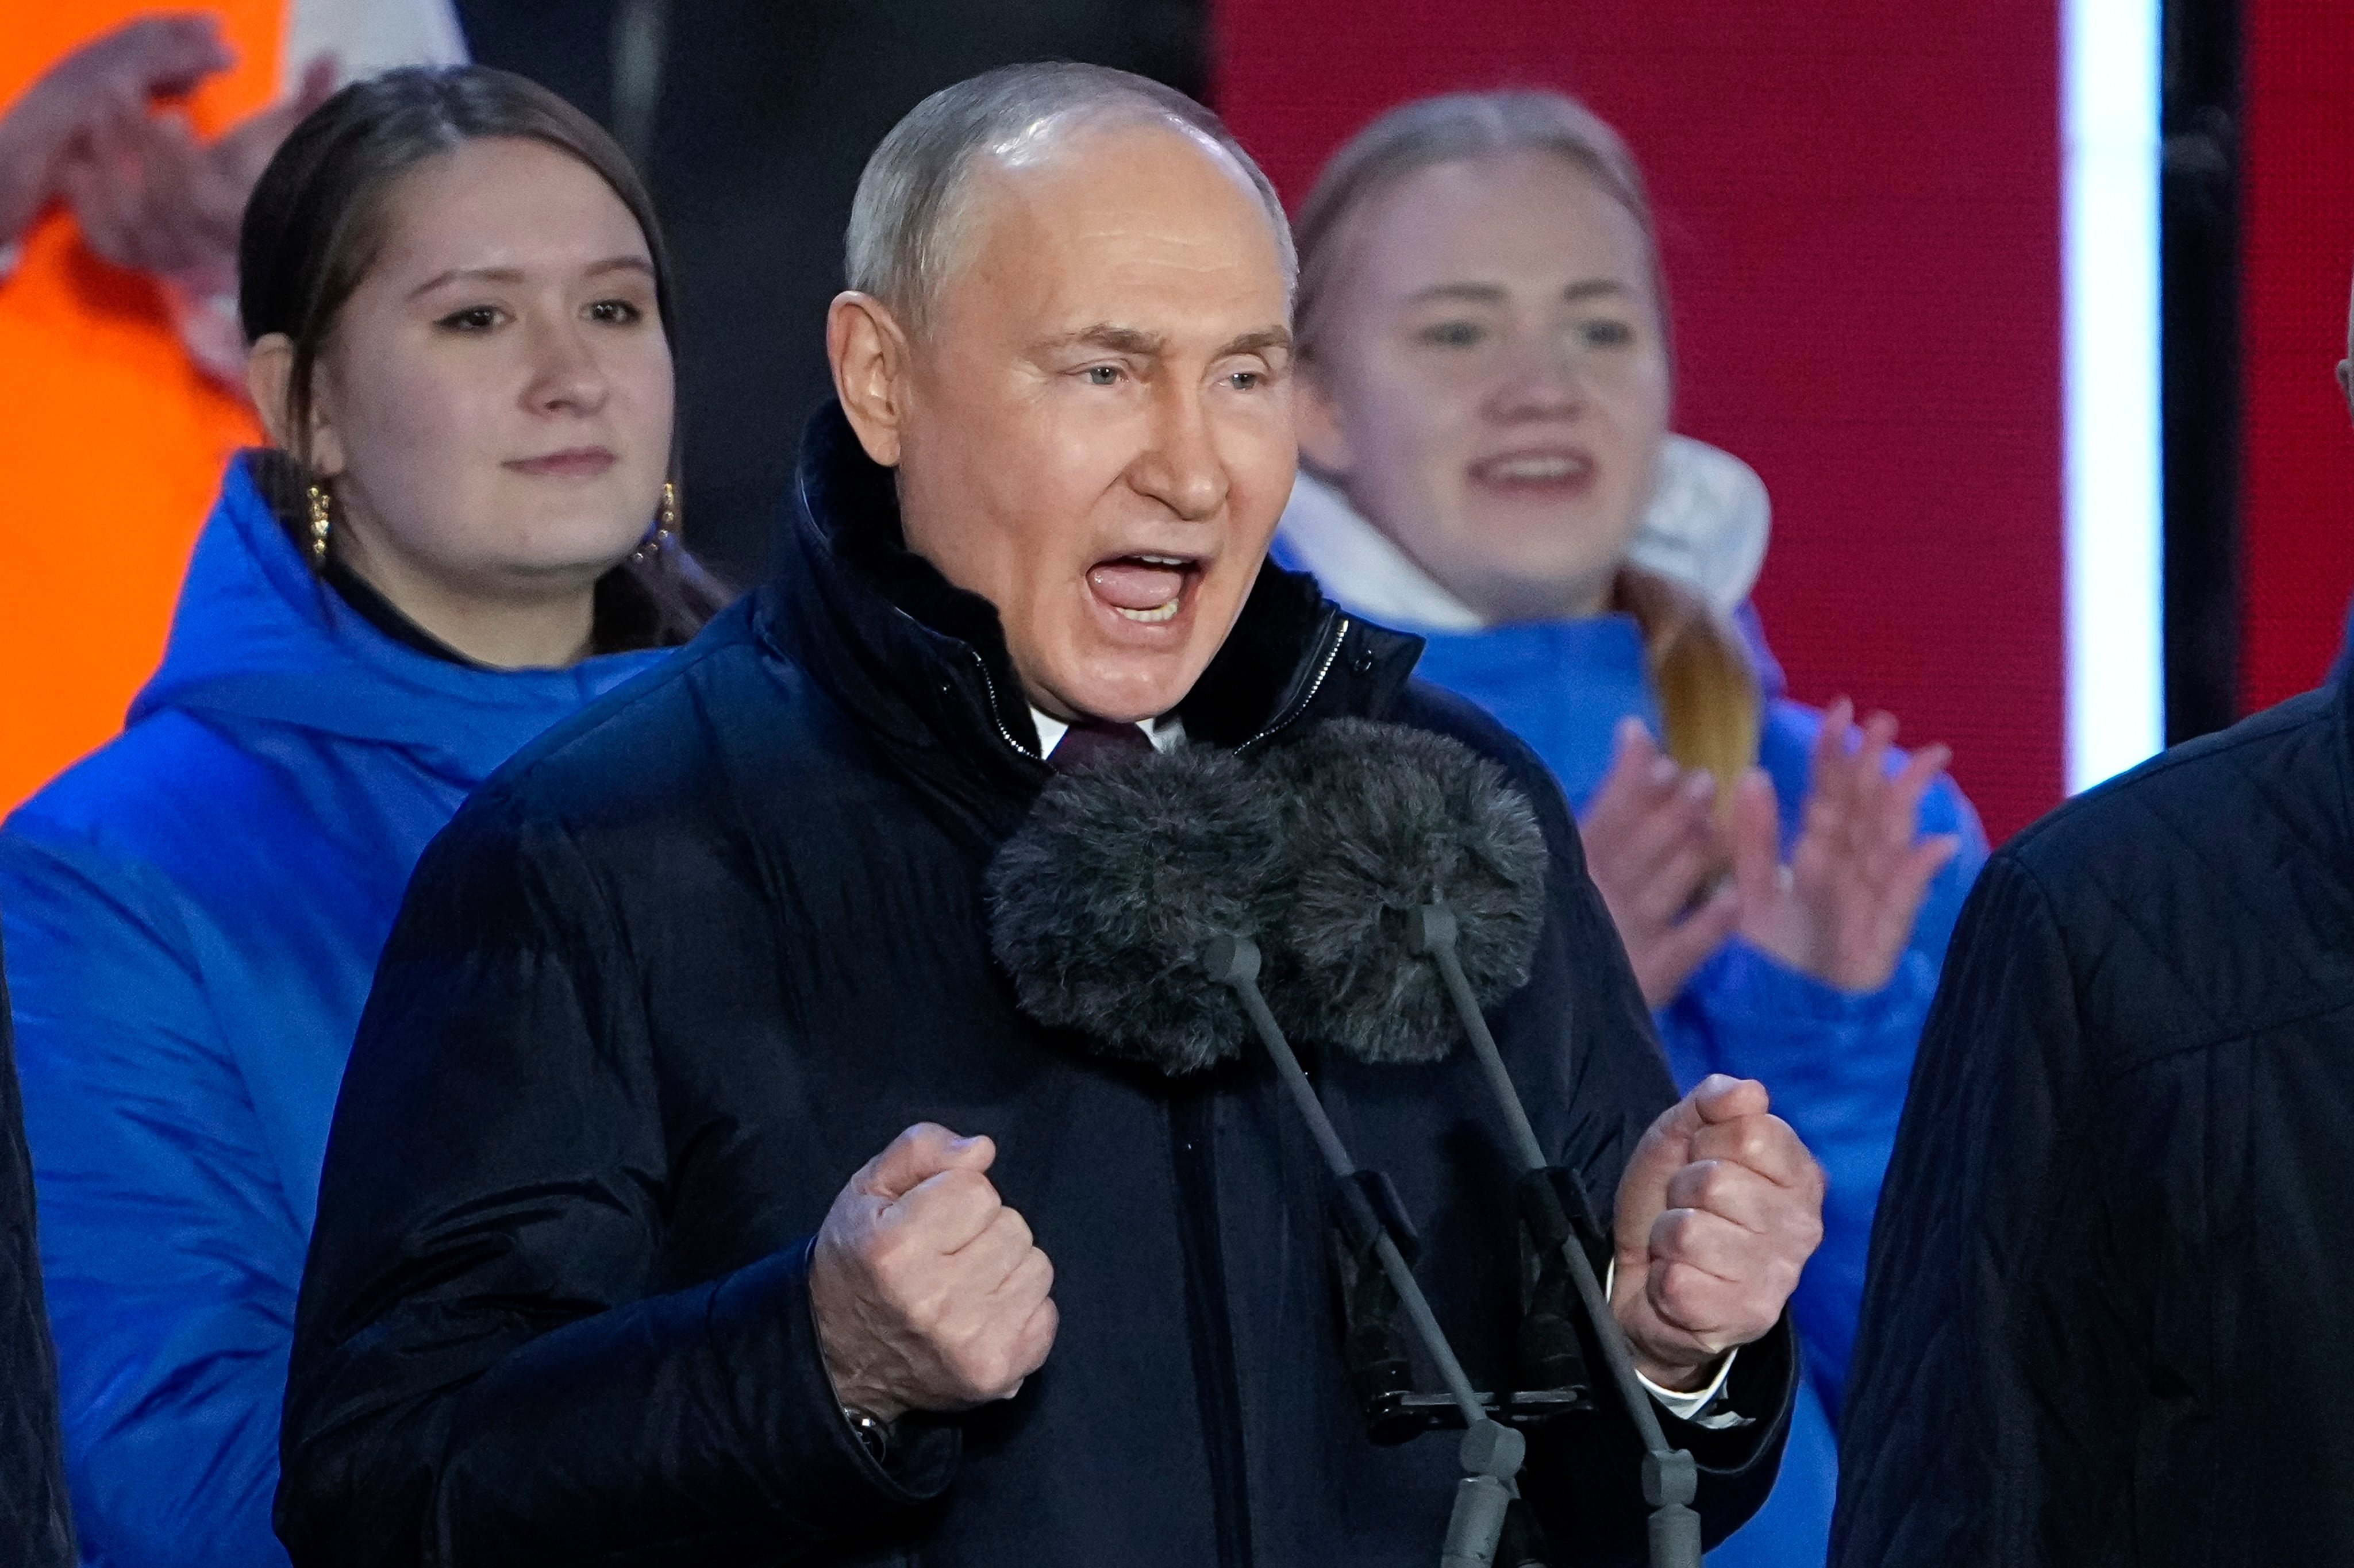 Russian President Vladimir Putin addressing a crowd in Red Square in Moscow on Monday. Photo: AP